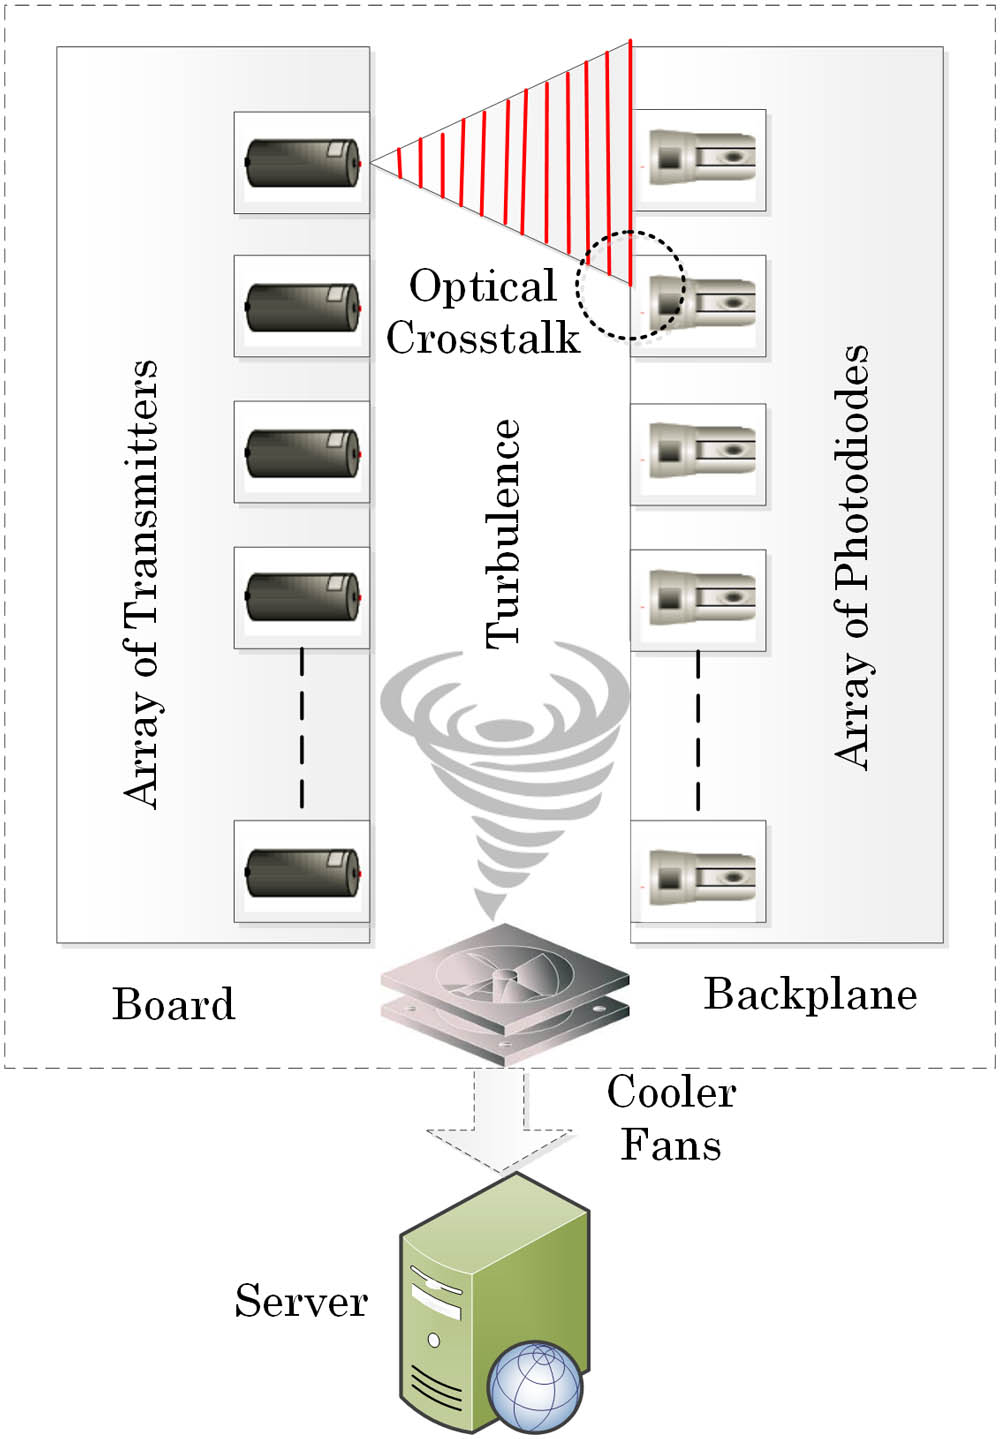 Board-to-backplane server interconnection links in the presence of crosstalk and turbulence inducing signal interference and fades.